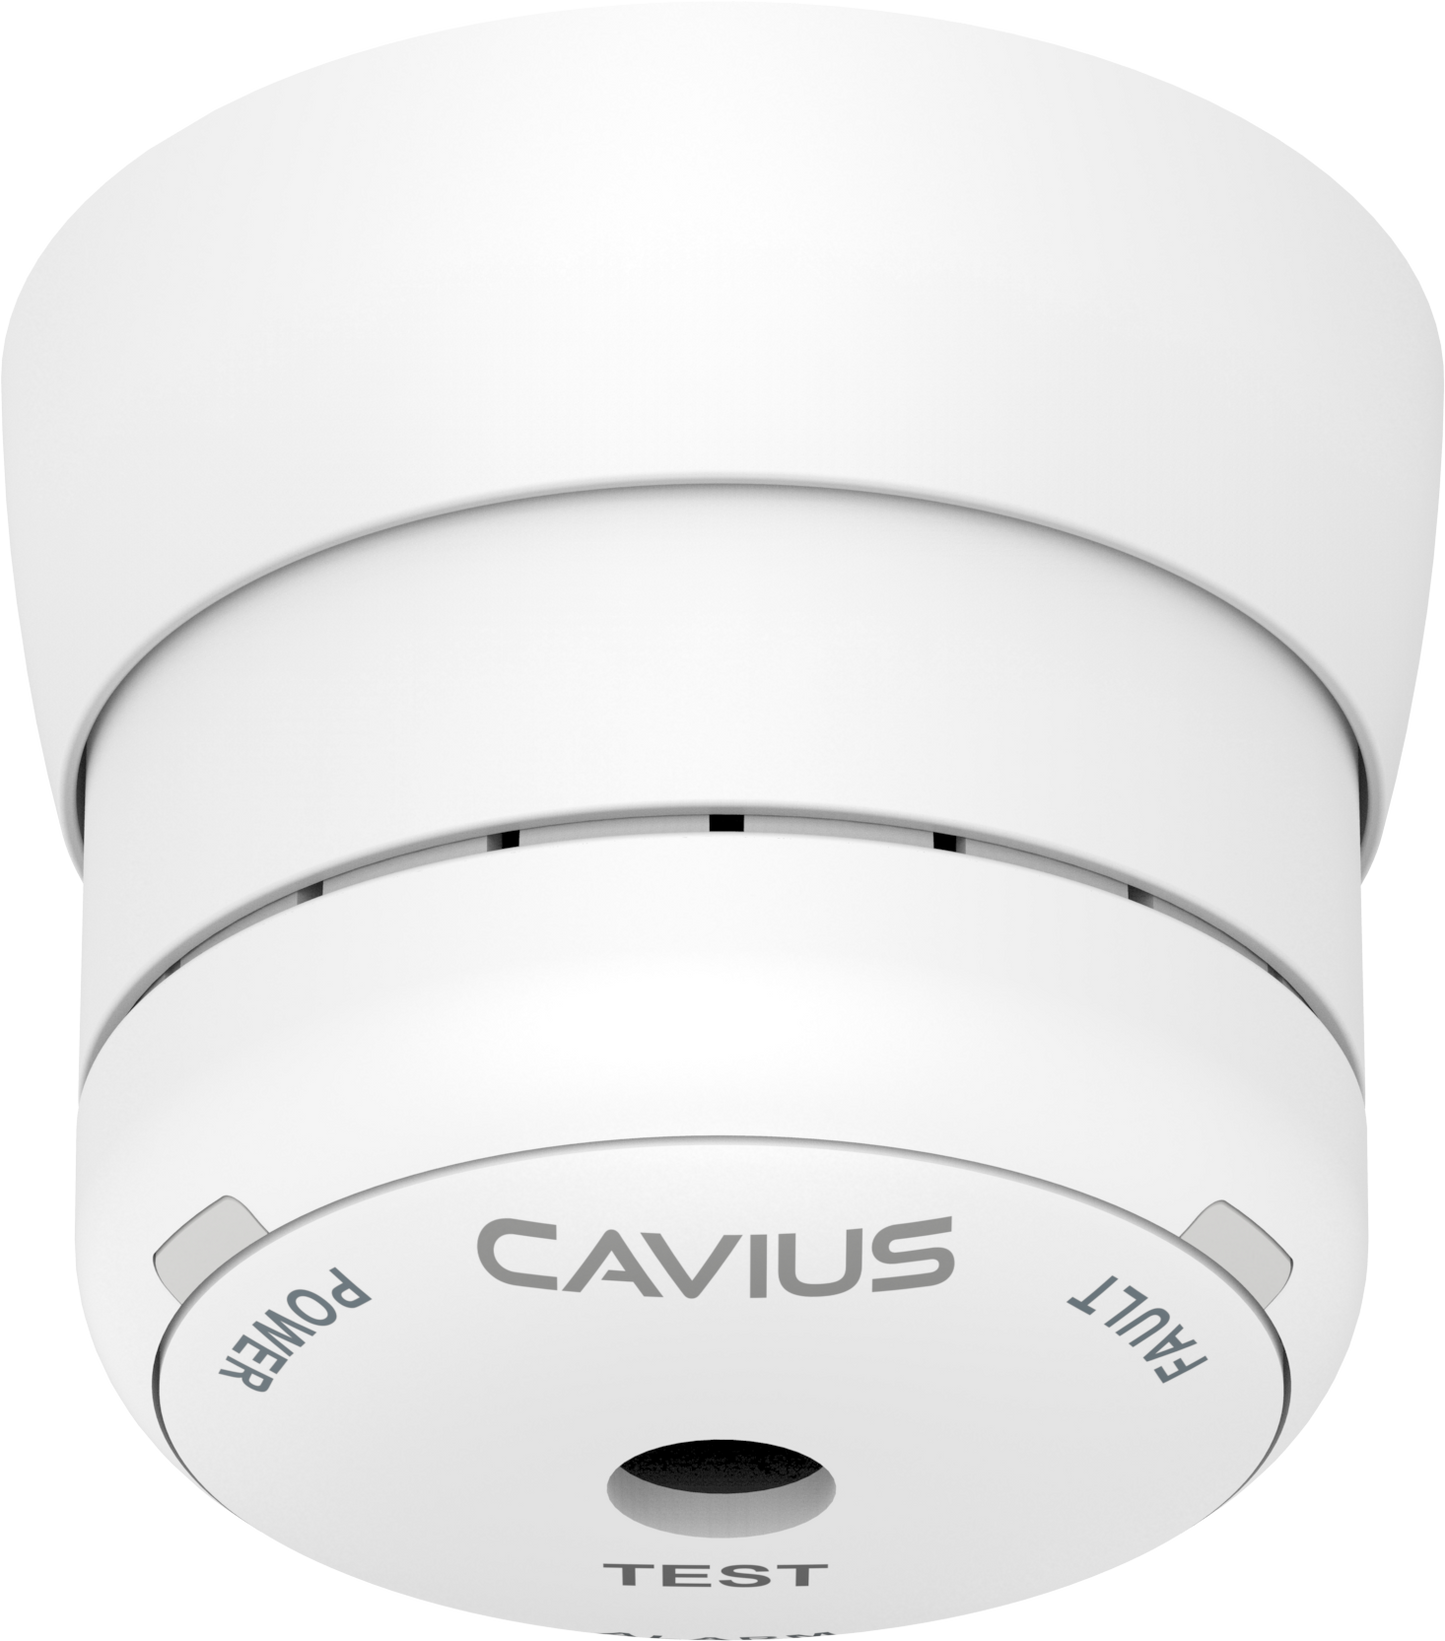 Cavius CO2 Detector 10-year, 40mm (stand alone)